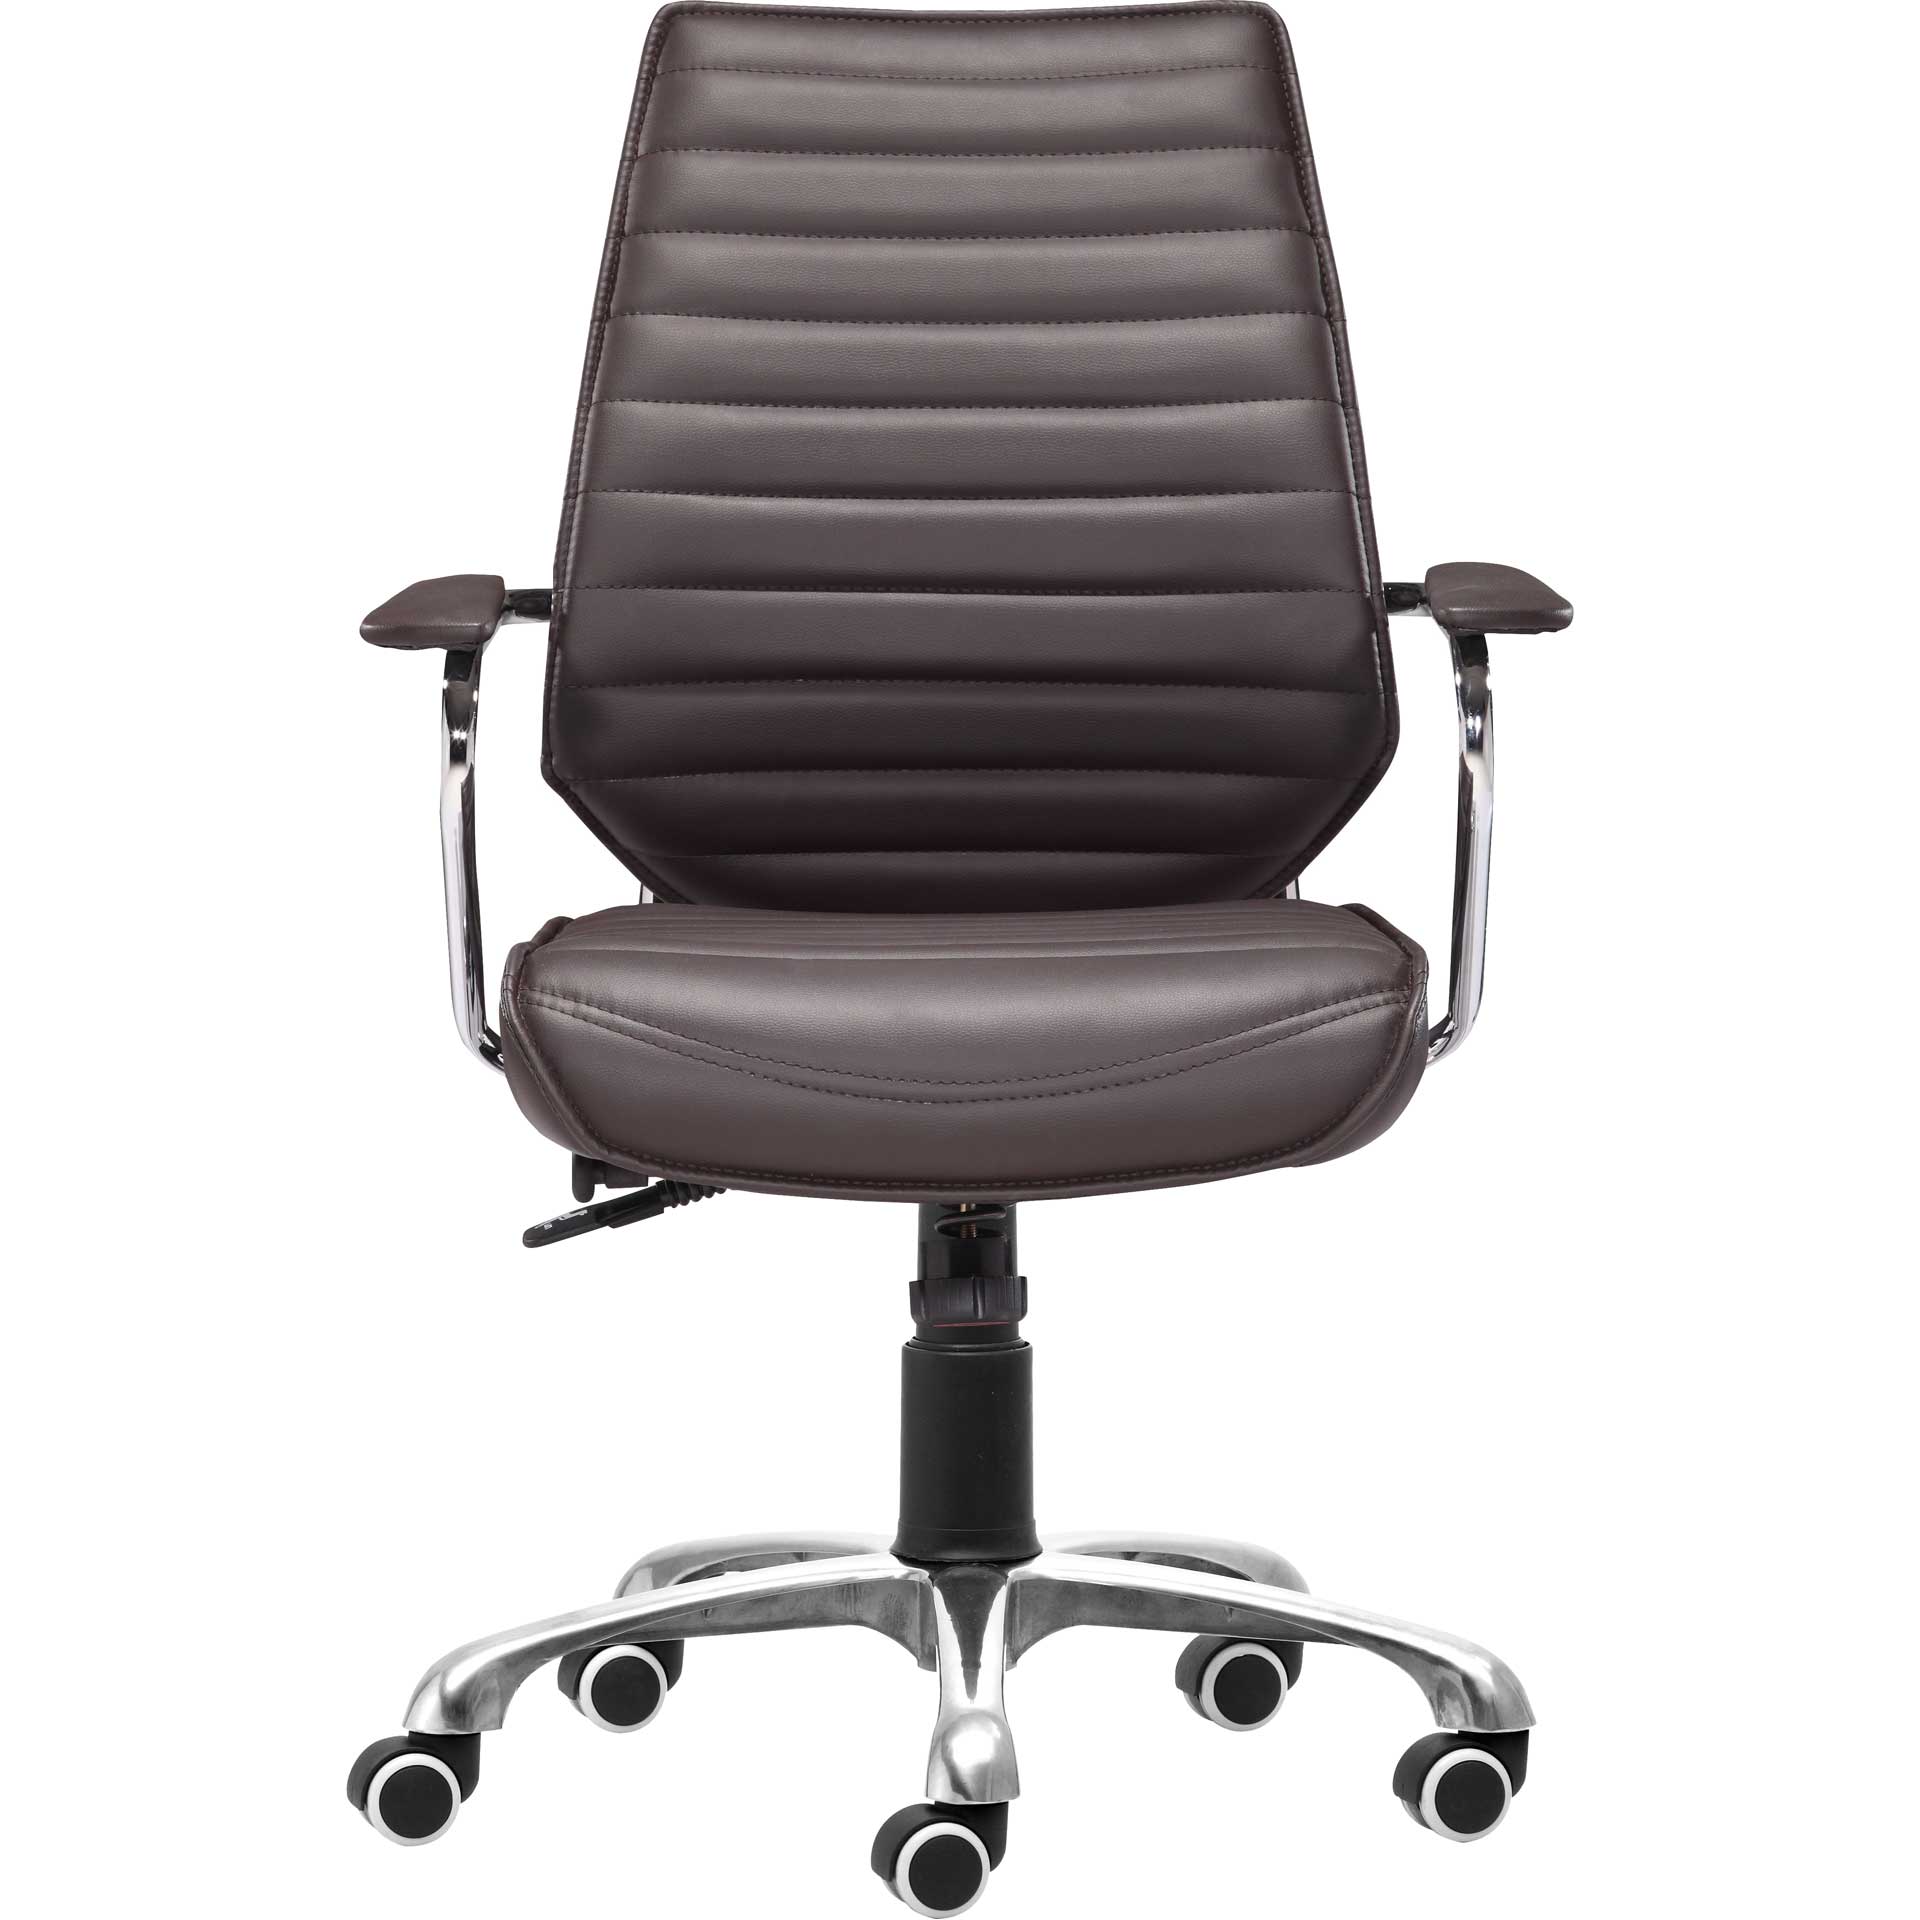 Engineer Low Back Office Chair Espresso